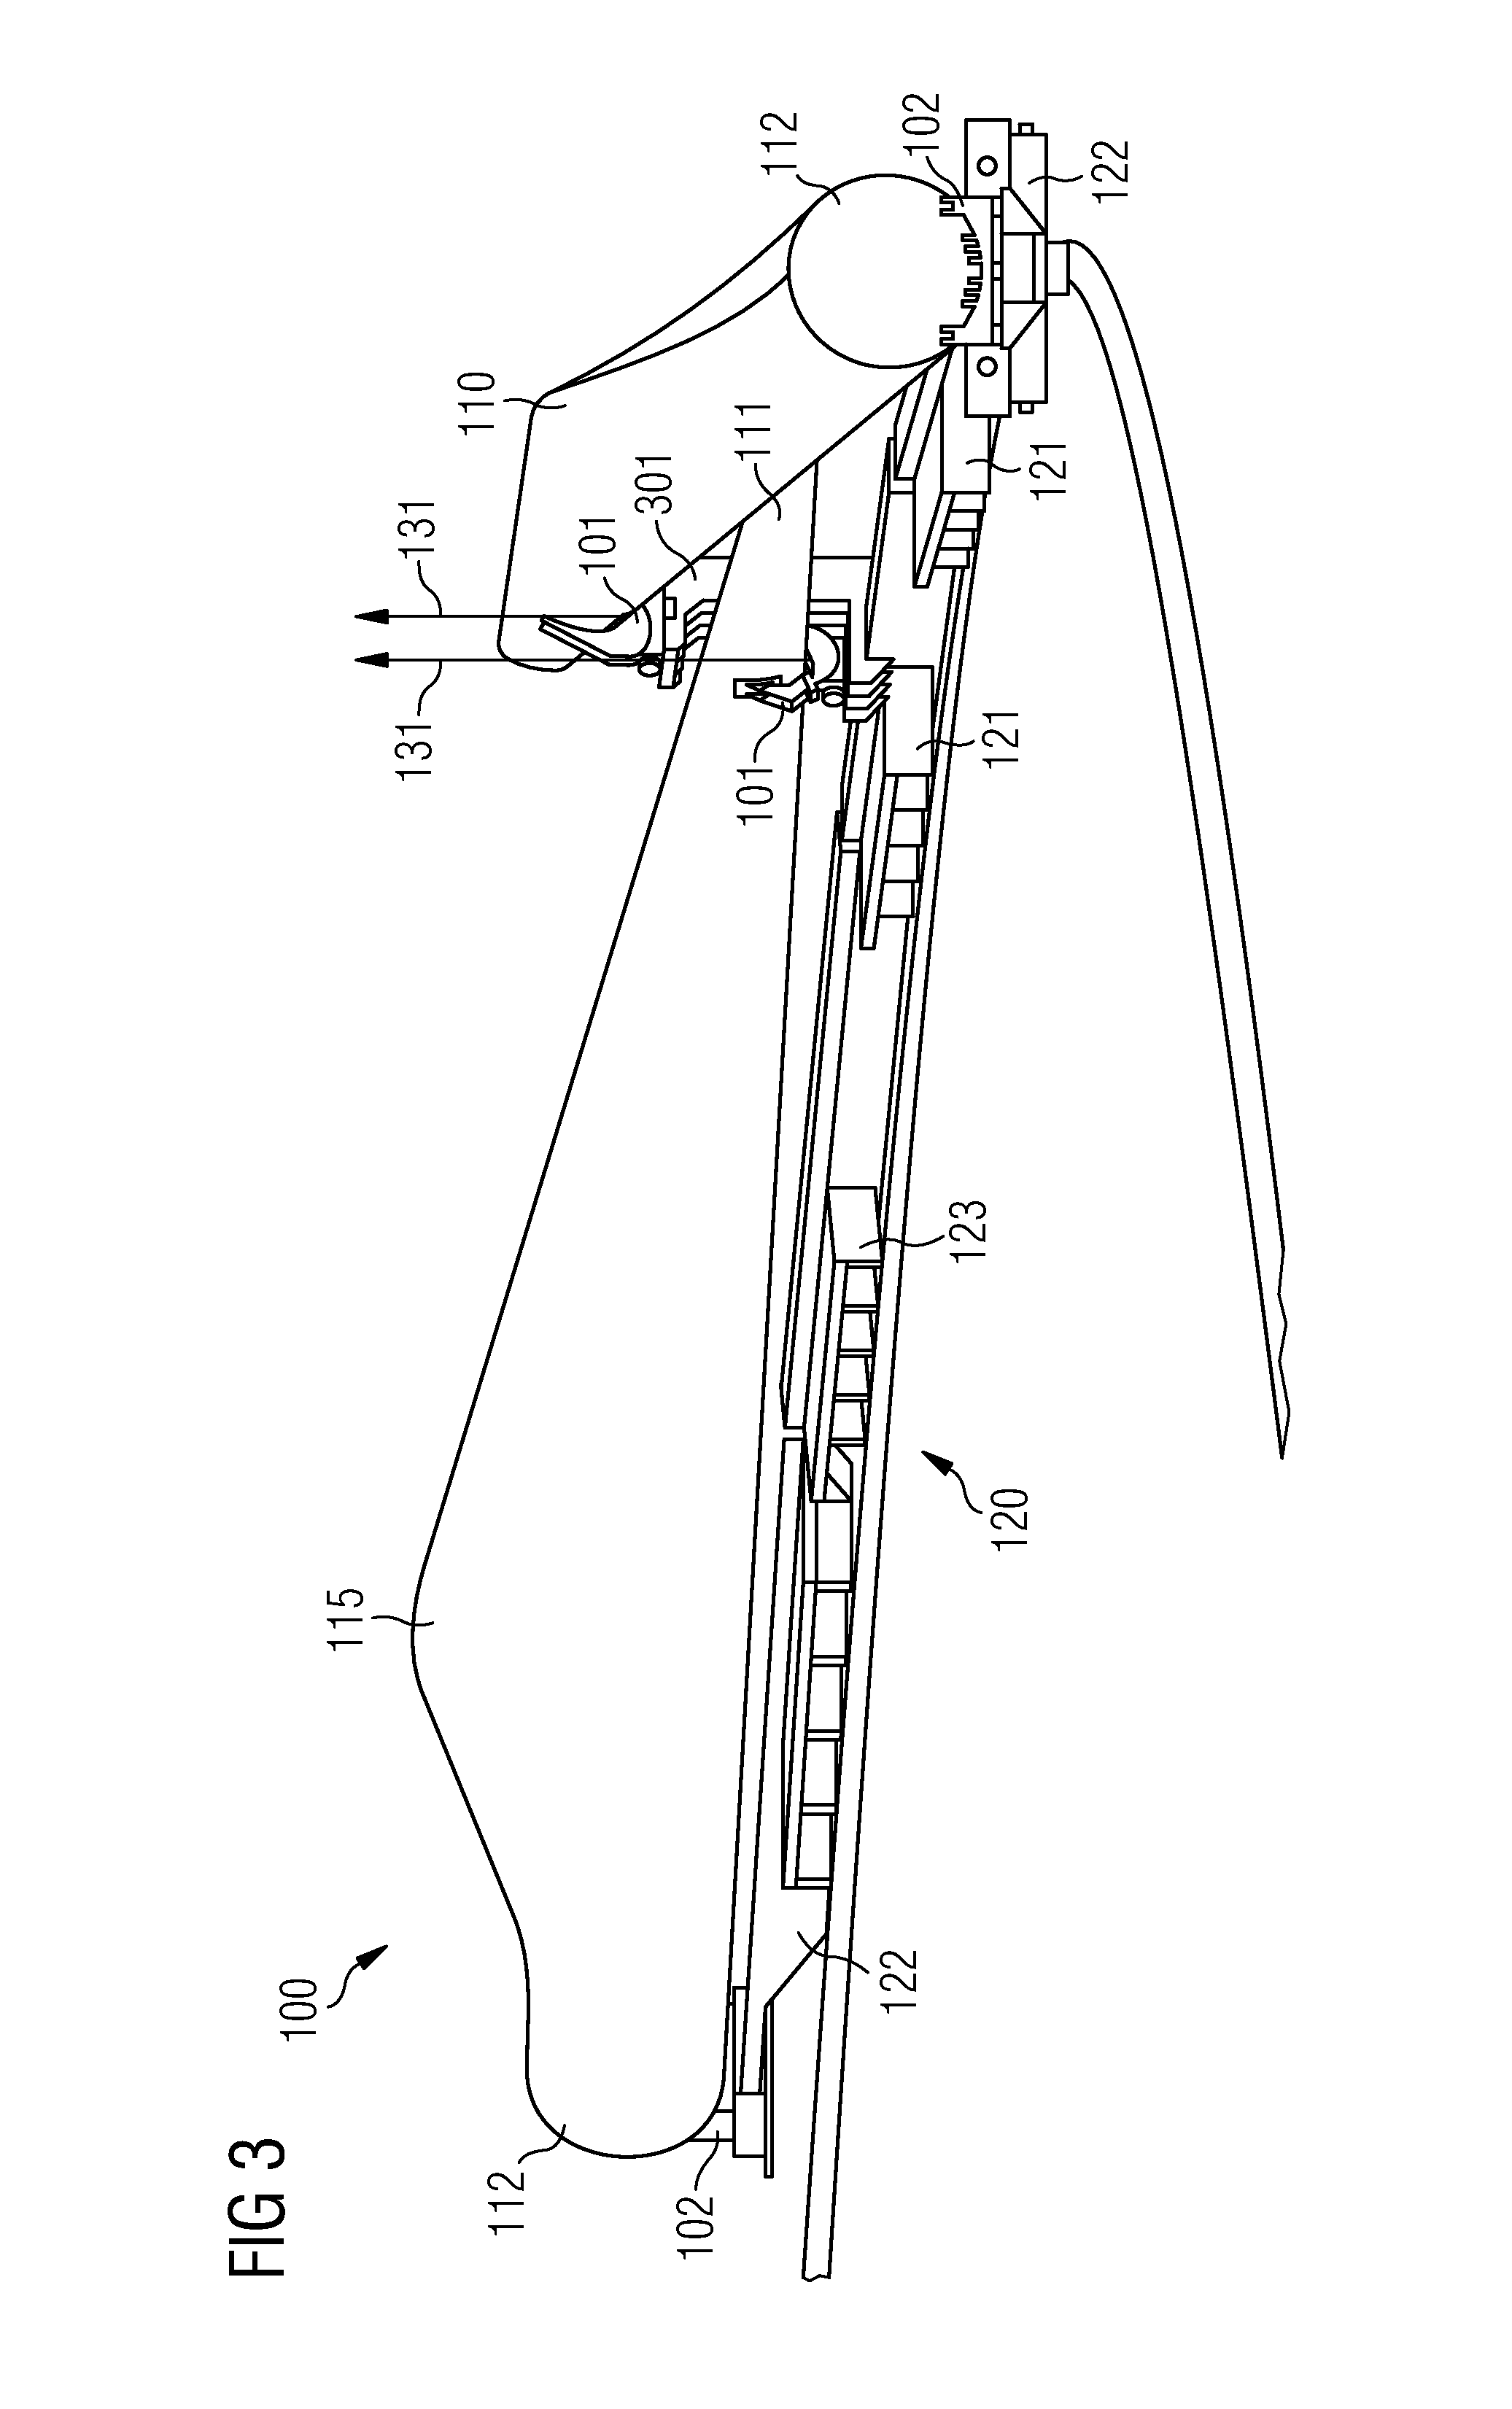 System for transportation of blades on railcars